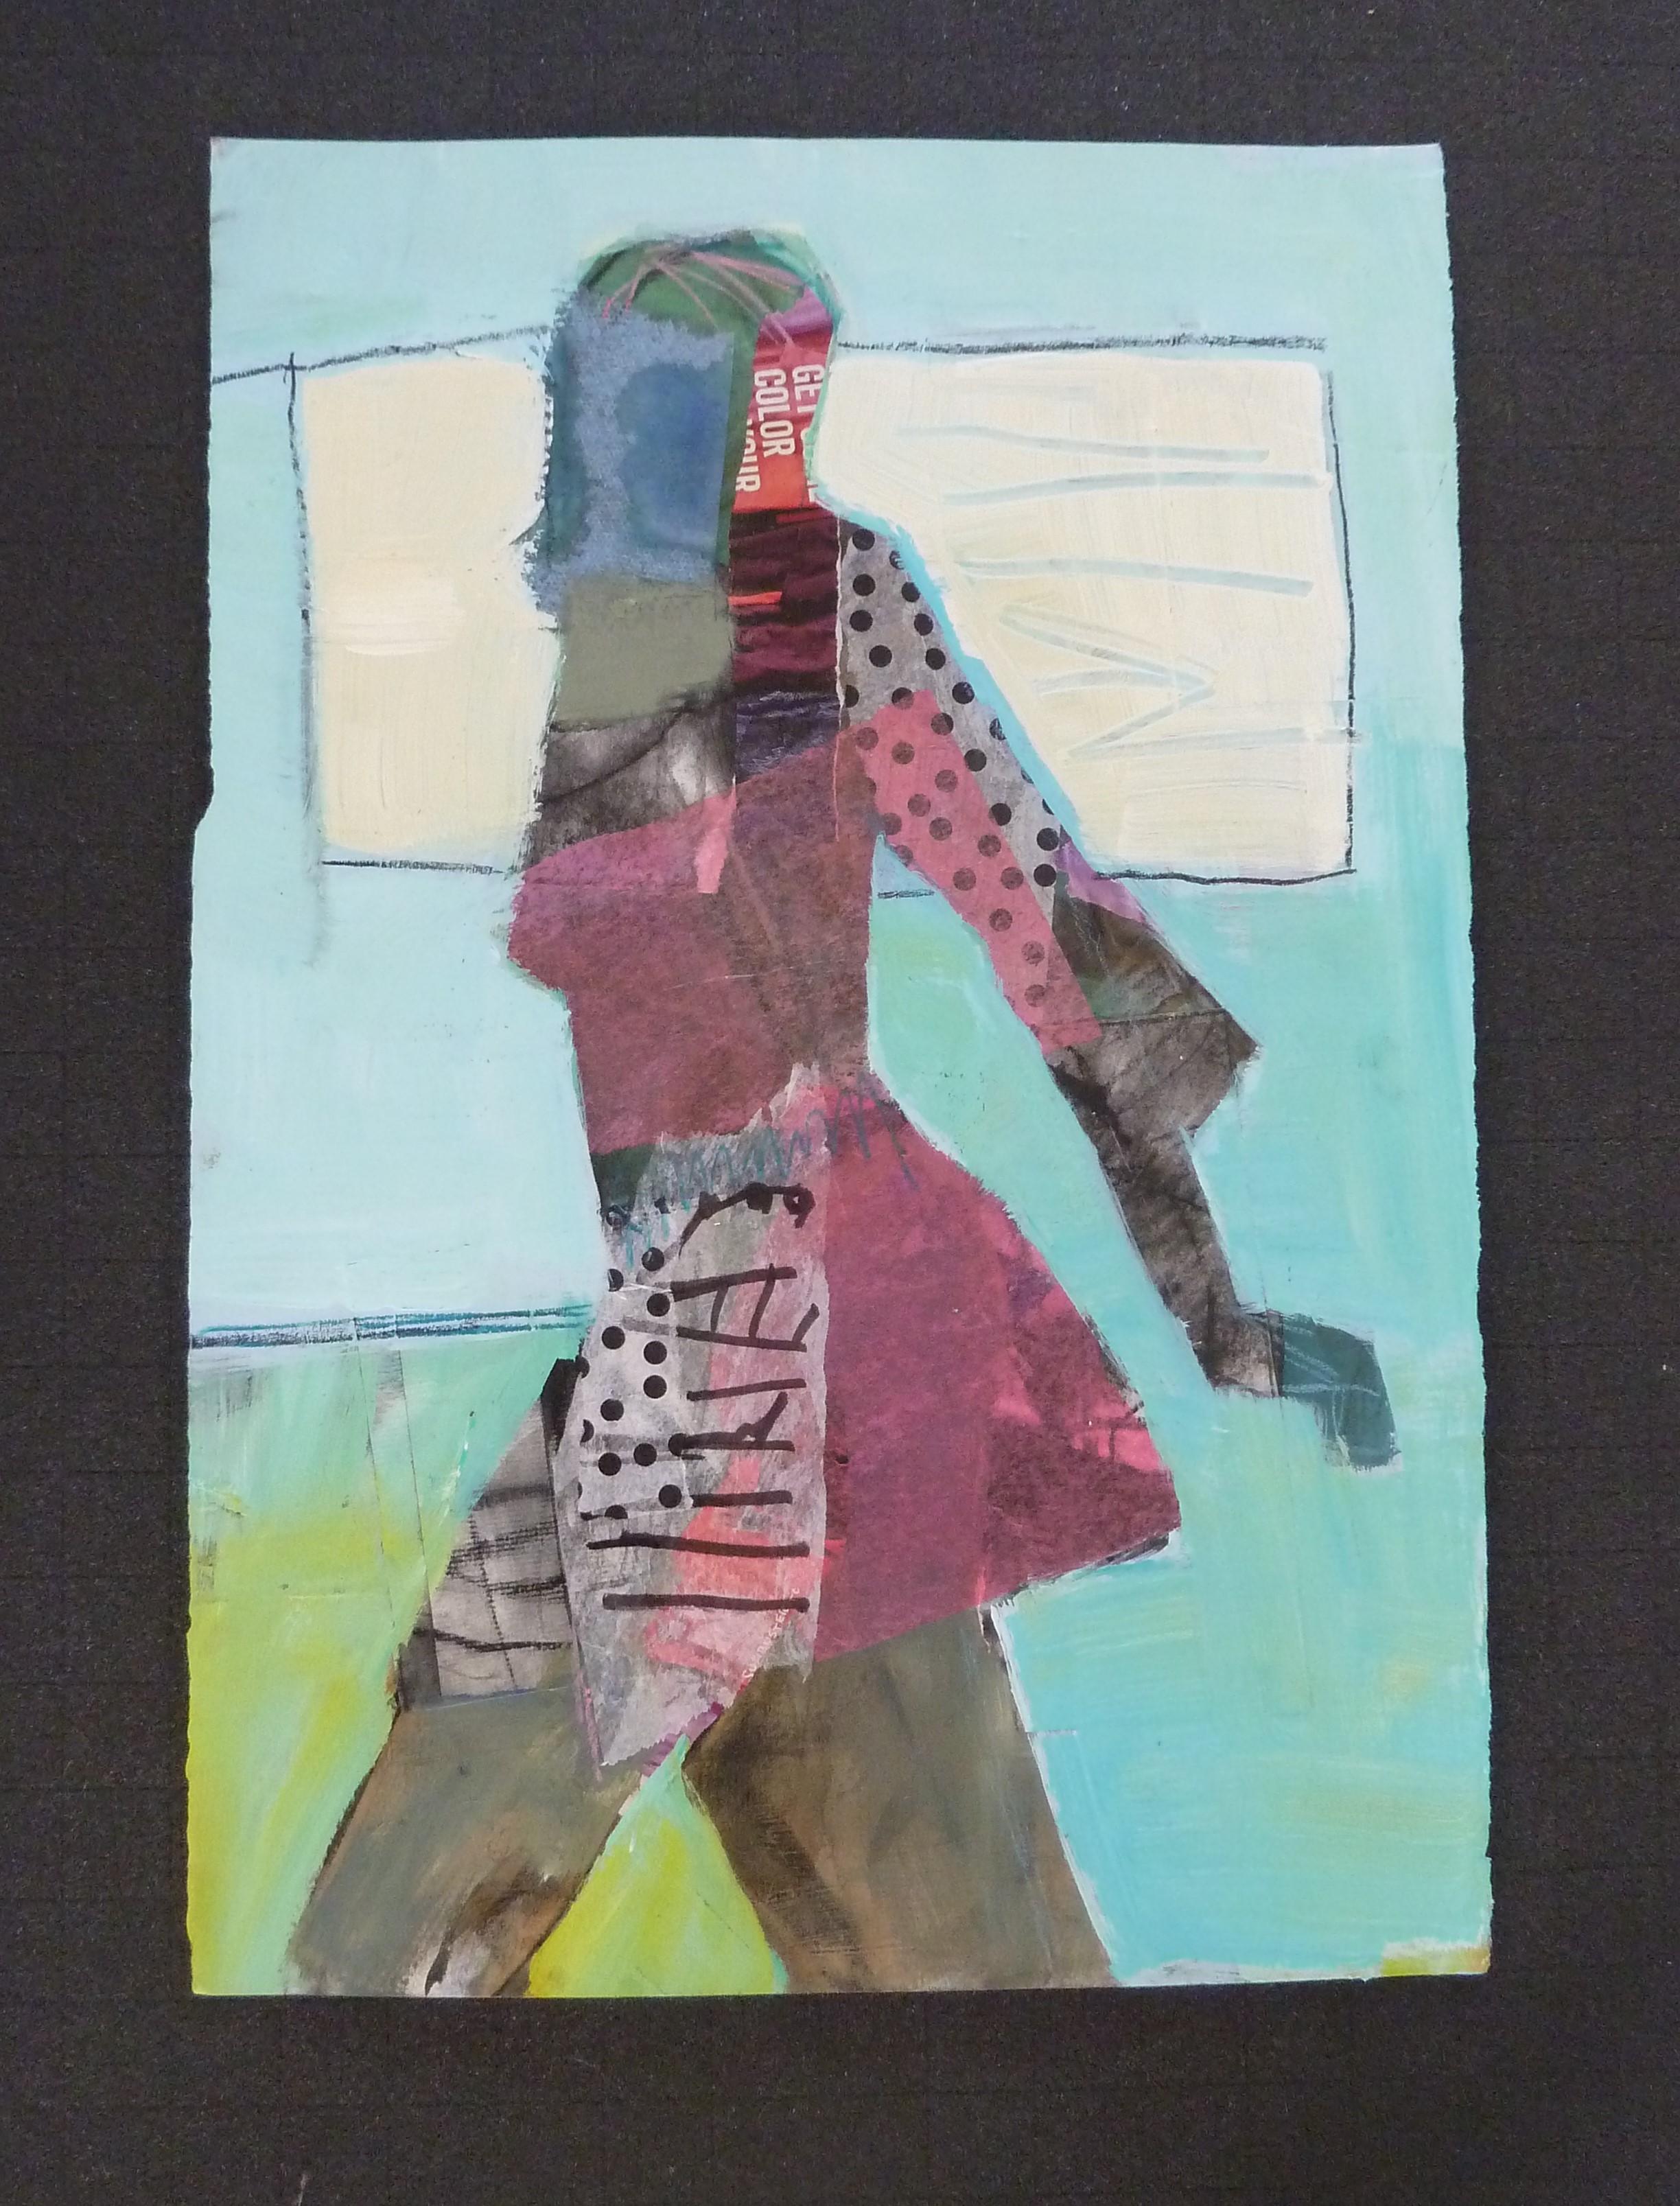 <p>Artist Comments<br>Artist Gail Ragains captures the gesture of a woman in motion. The abstraction of the figure allows the viewer an interpretation of their own. Gail creates vigorous energy with collaged elements, polka dots, and enticing hues